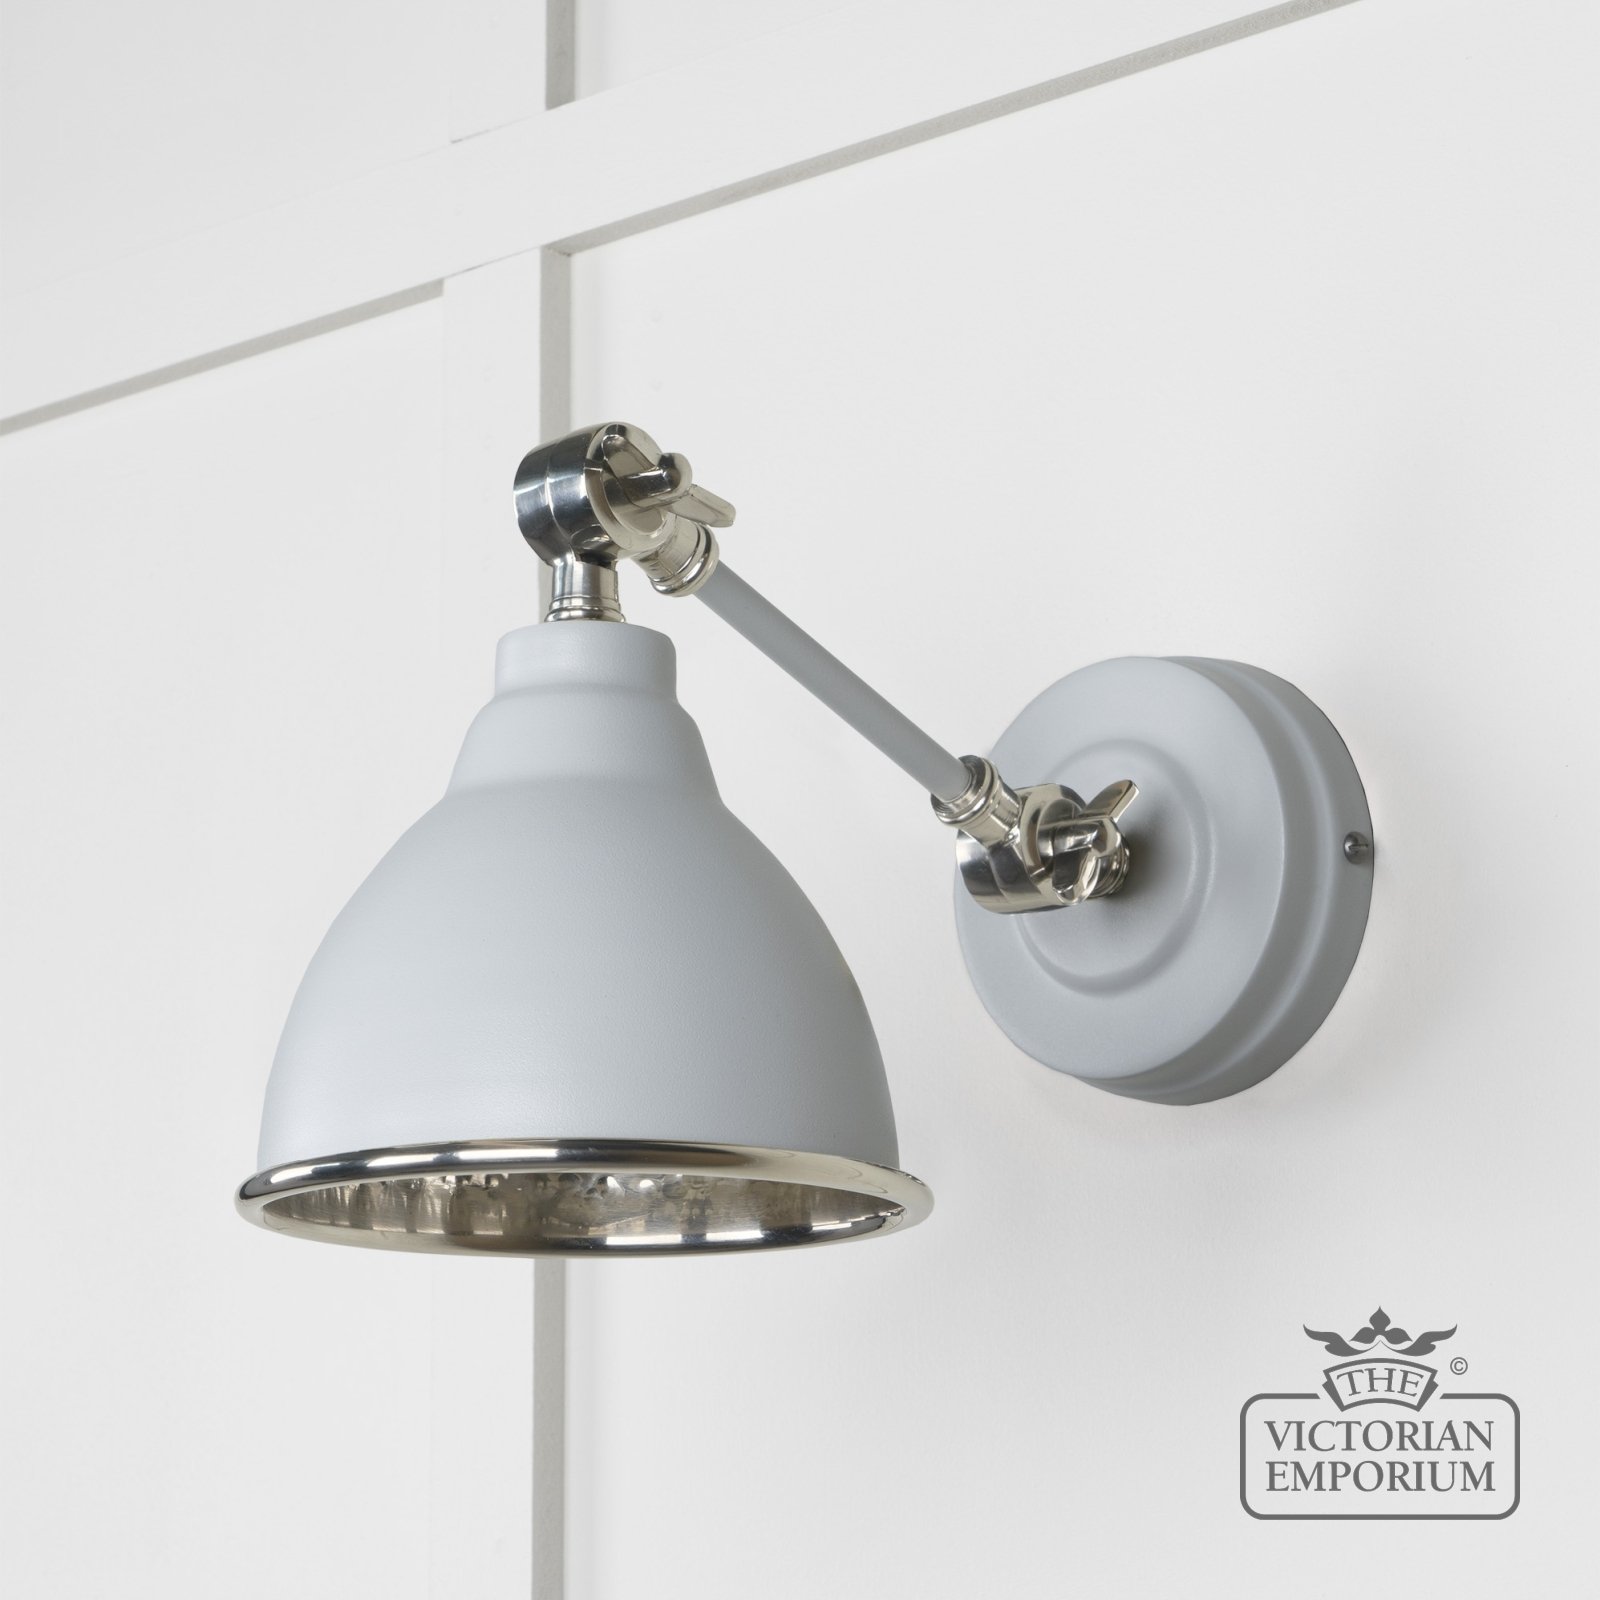 Brindle Wall Light with Hammered Nickel Interior and Birch Exterior